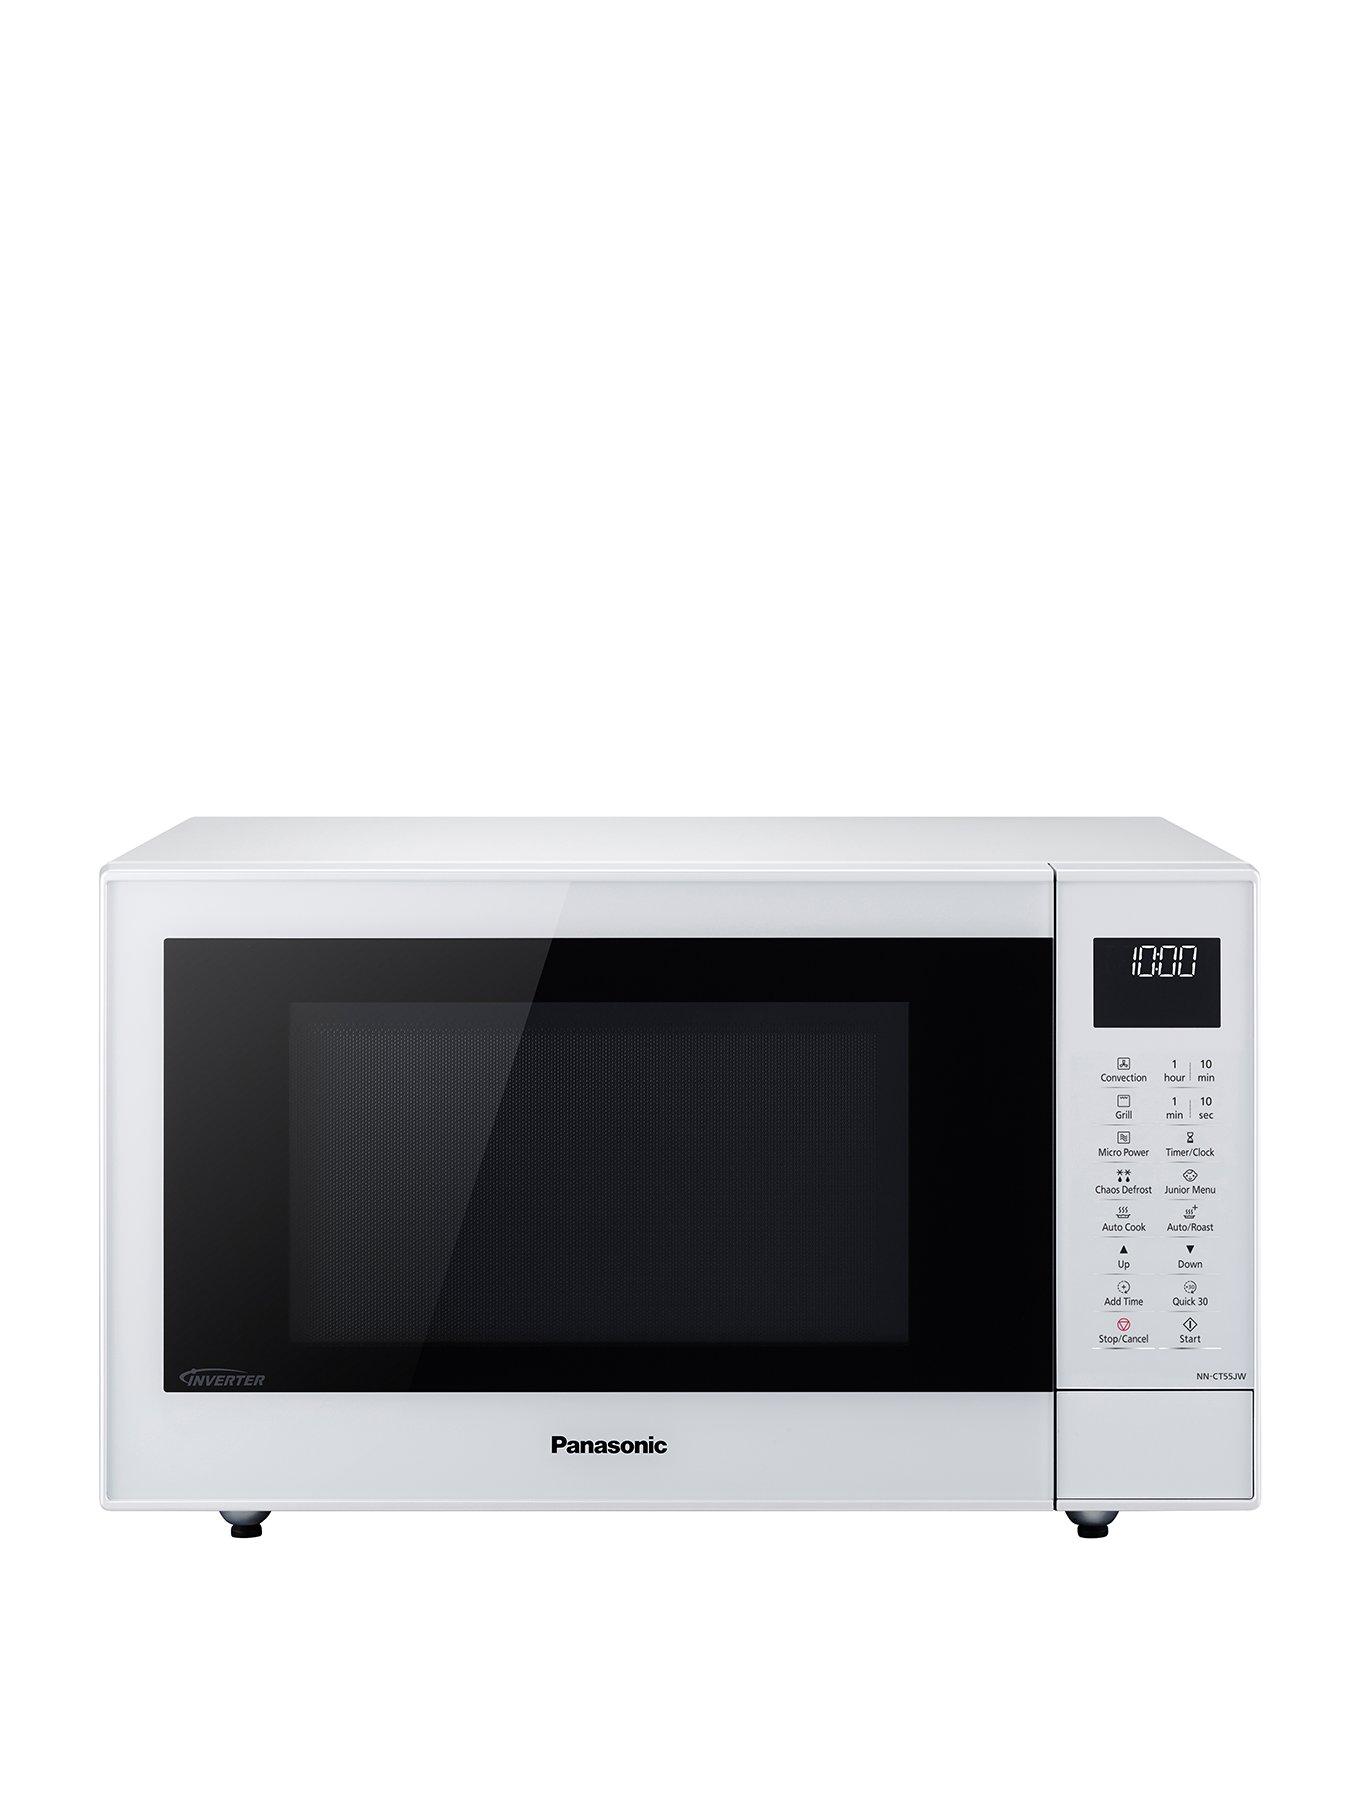 Microwave Oven - Low power - 320 Watts output power - drawing only 950  watts